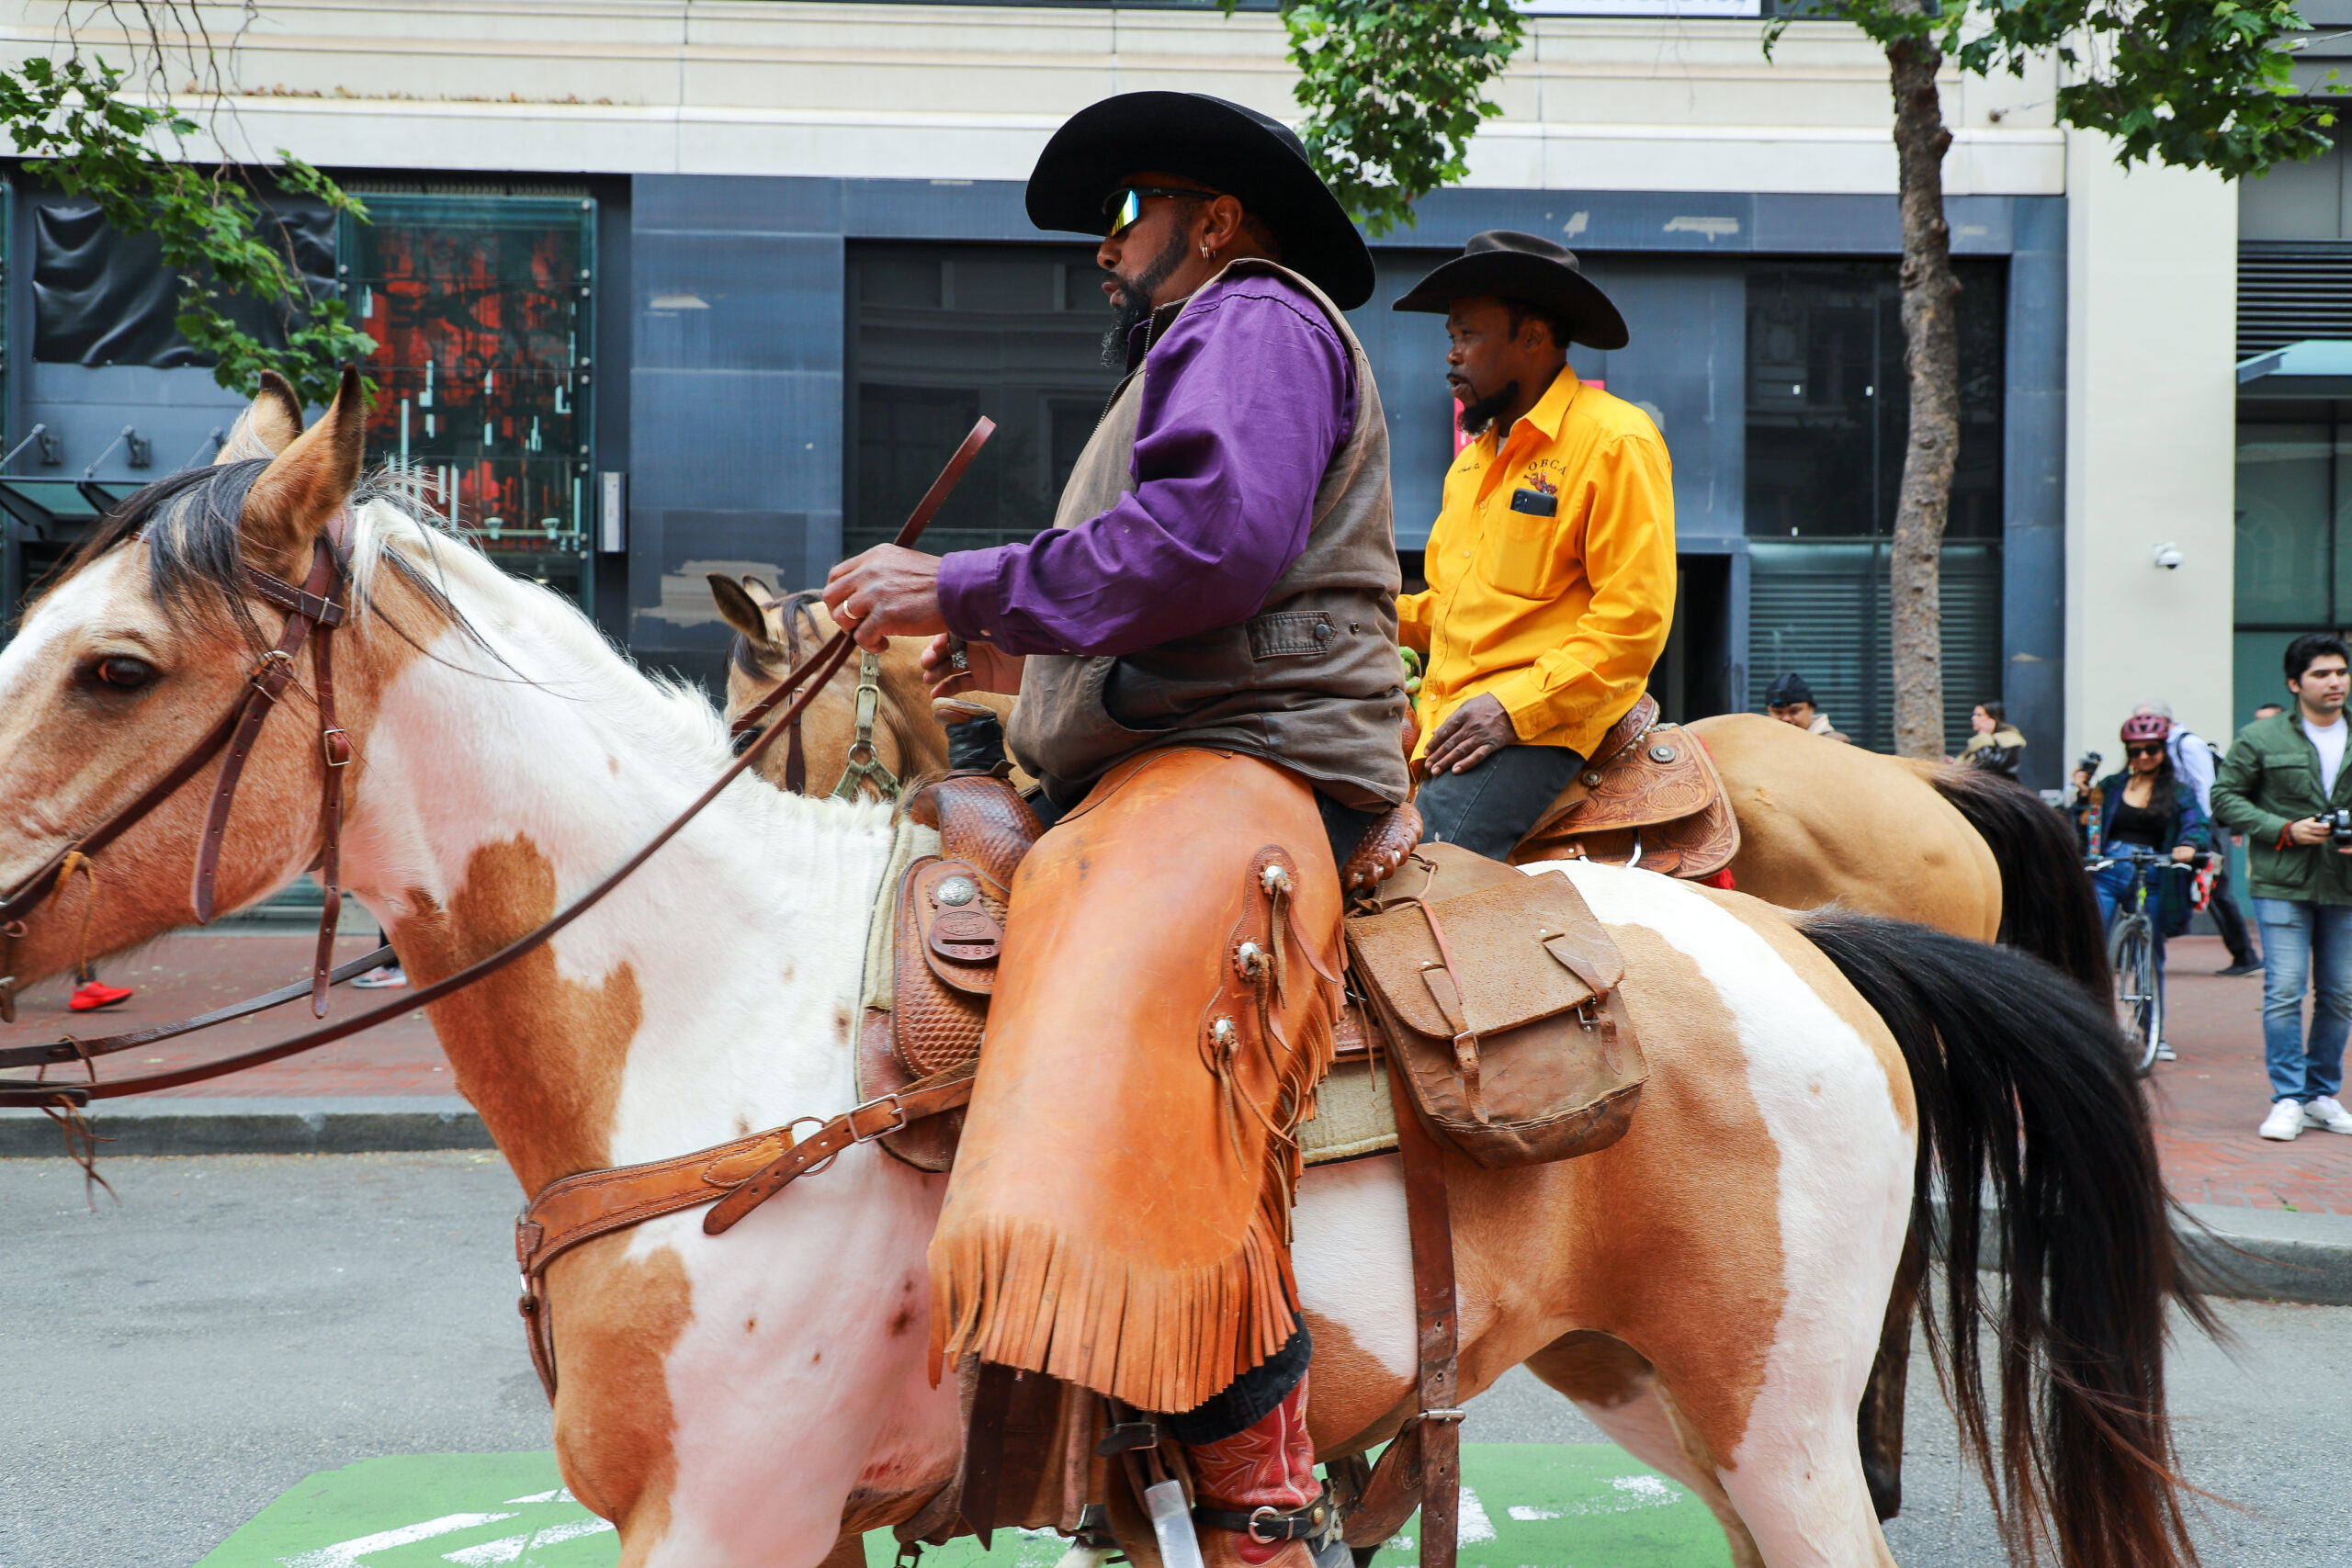 Two men in cowboy attire riding horses on a city street.